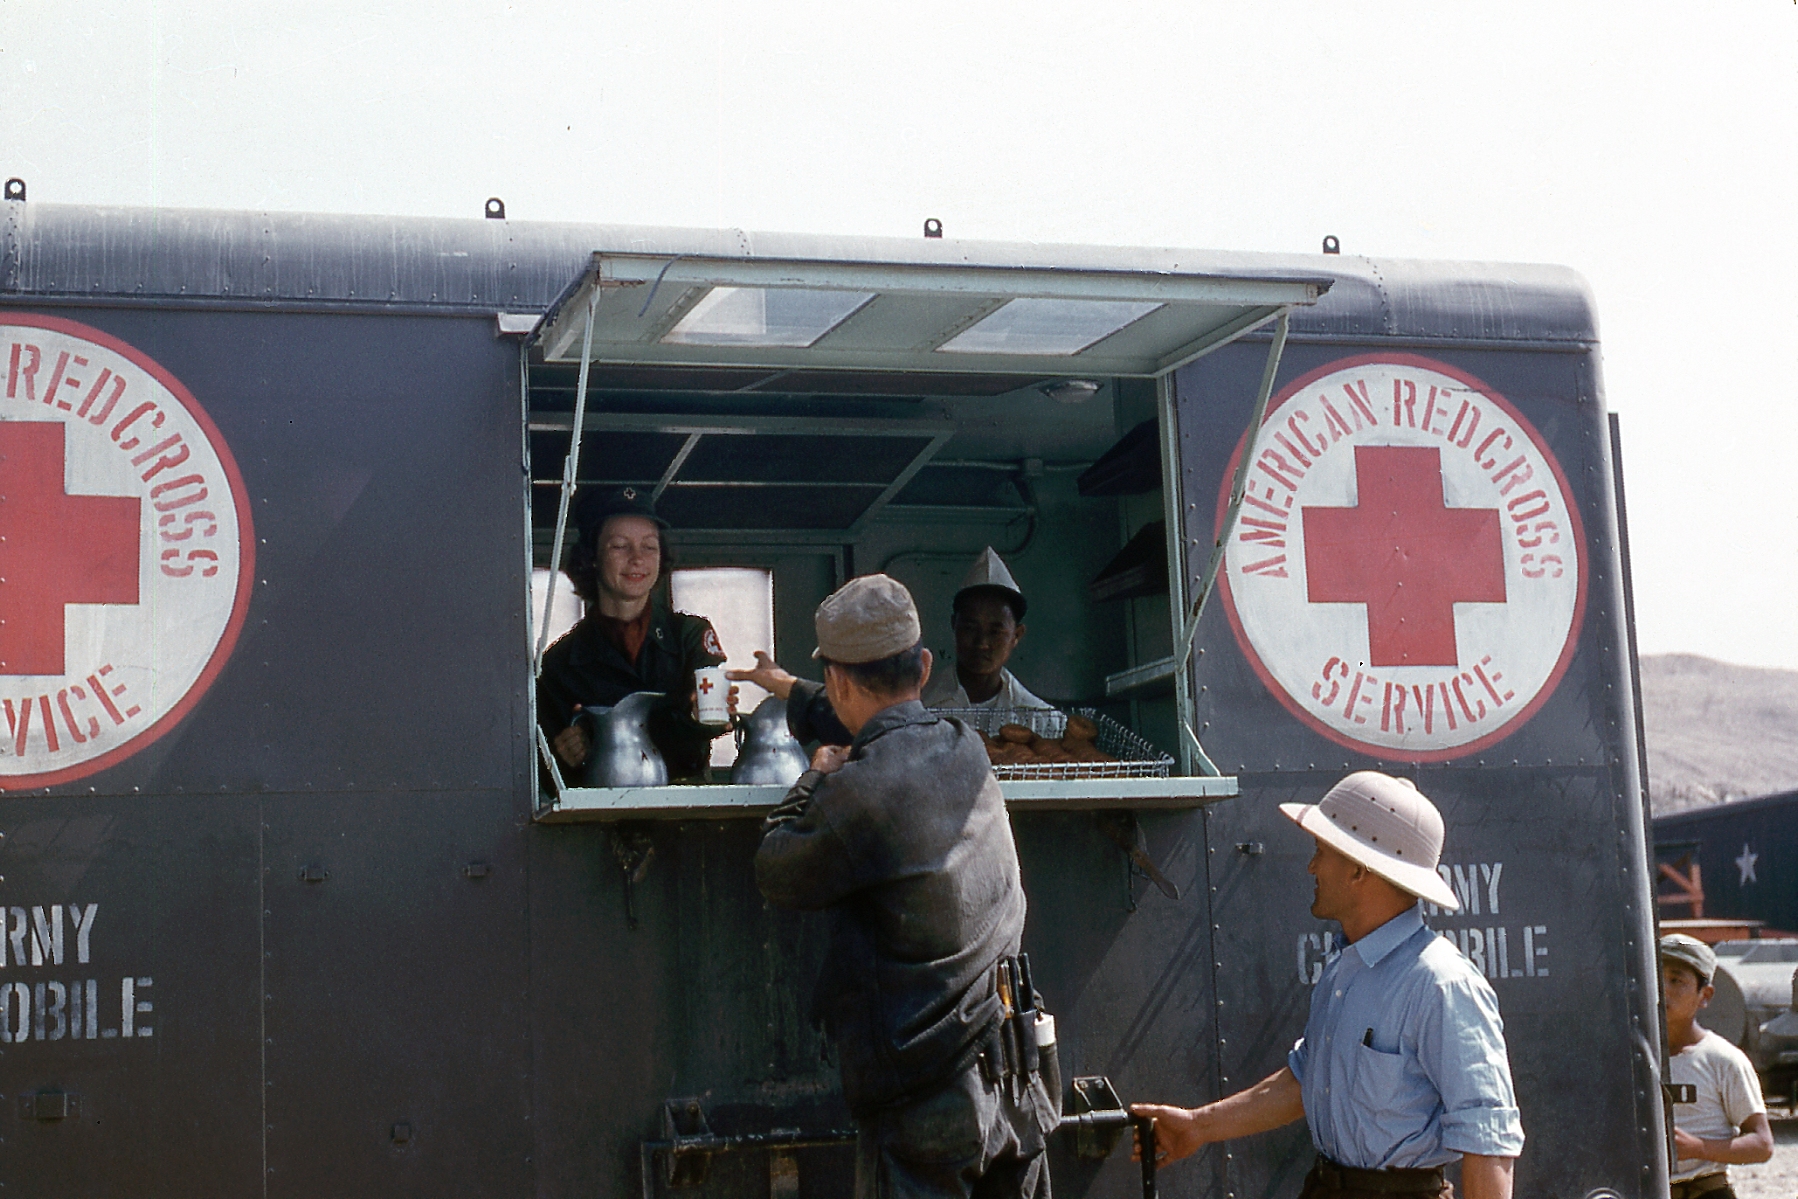 A mobile canteen. Taken by my father in Korea in 1952 or 1953. View full size.